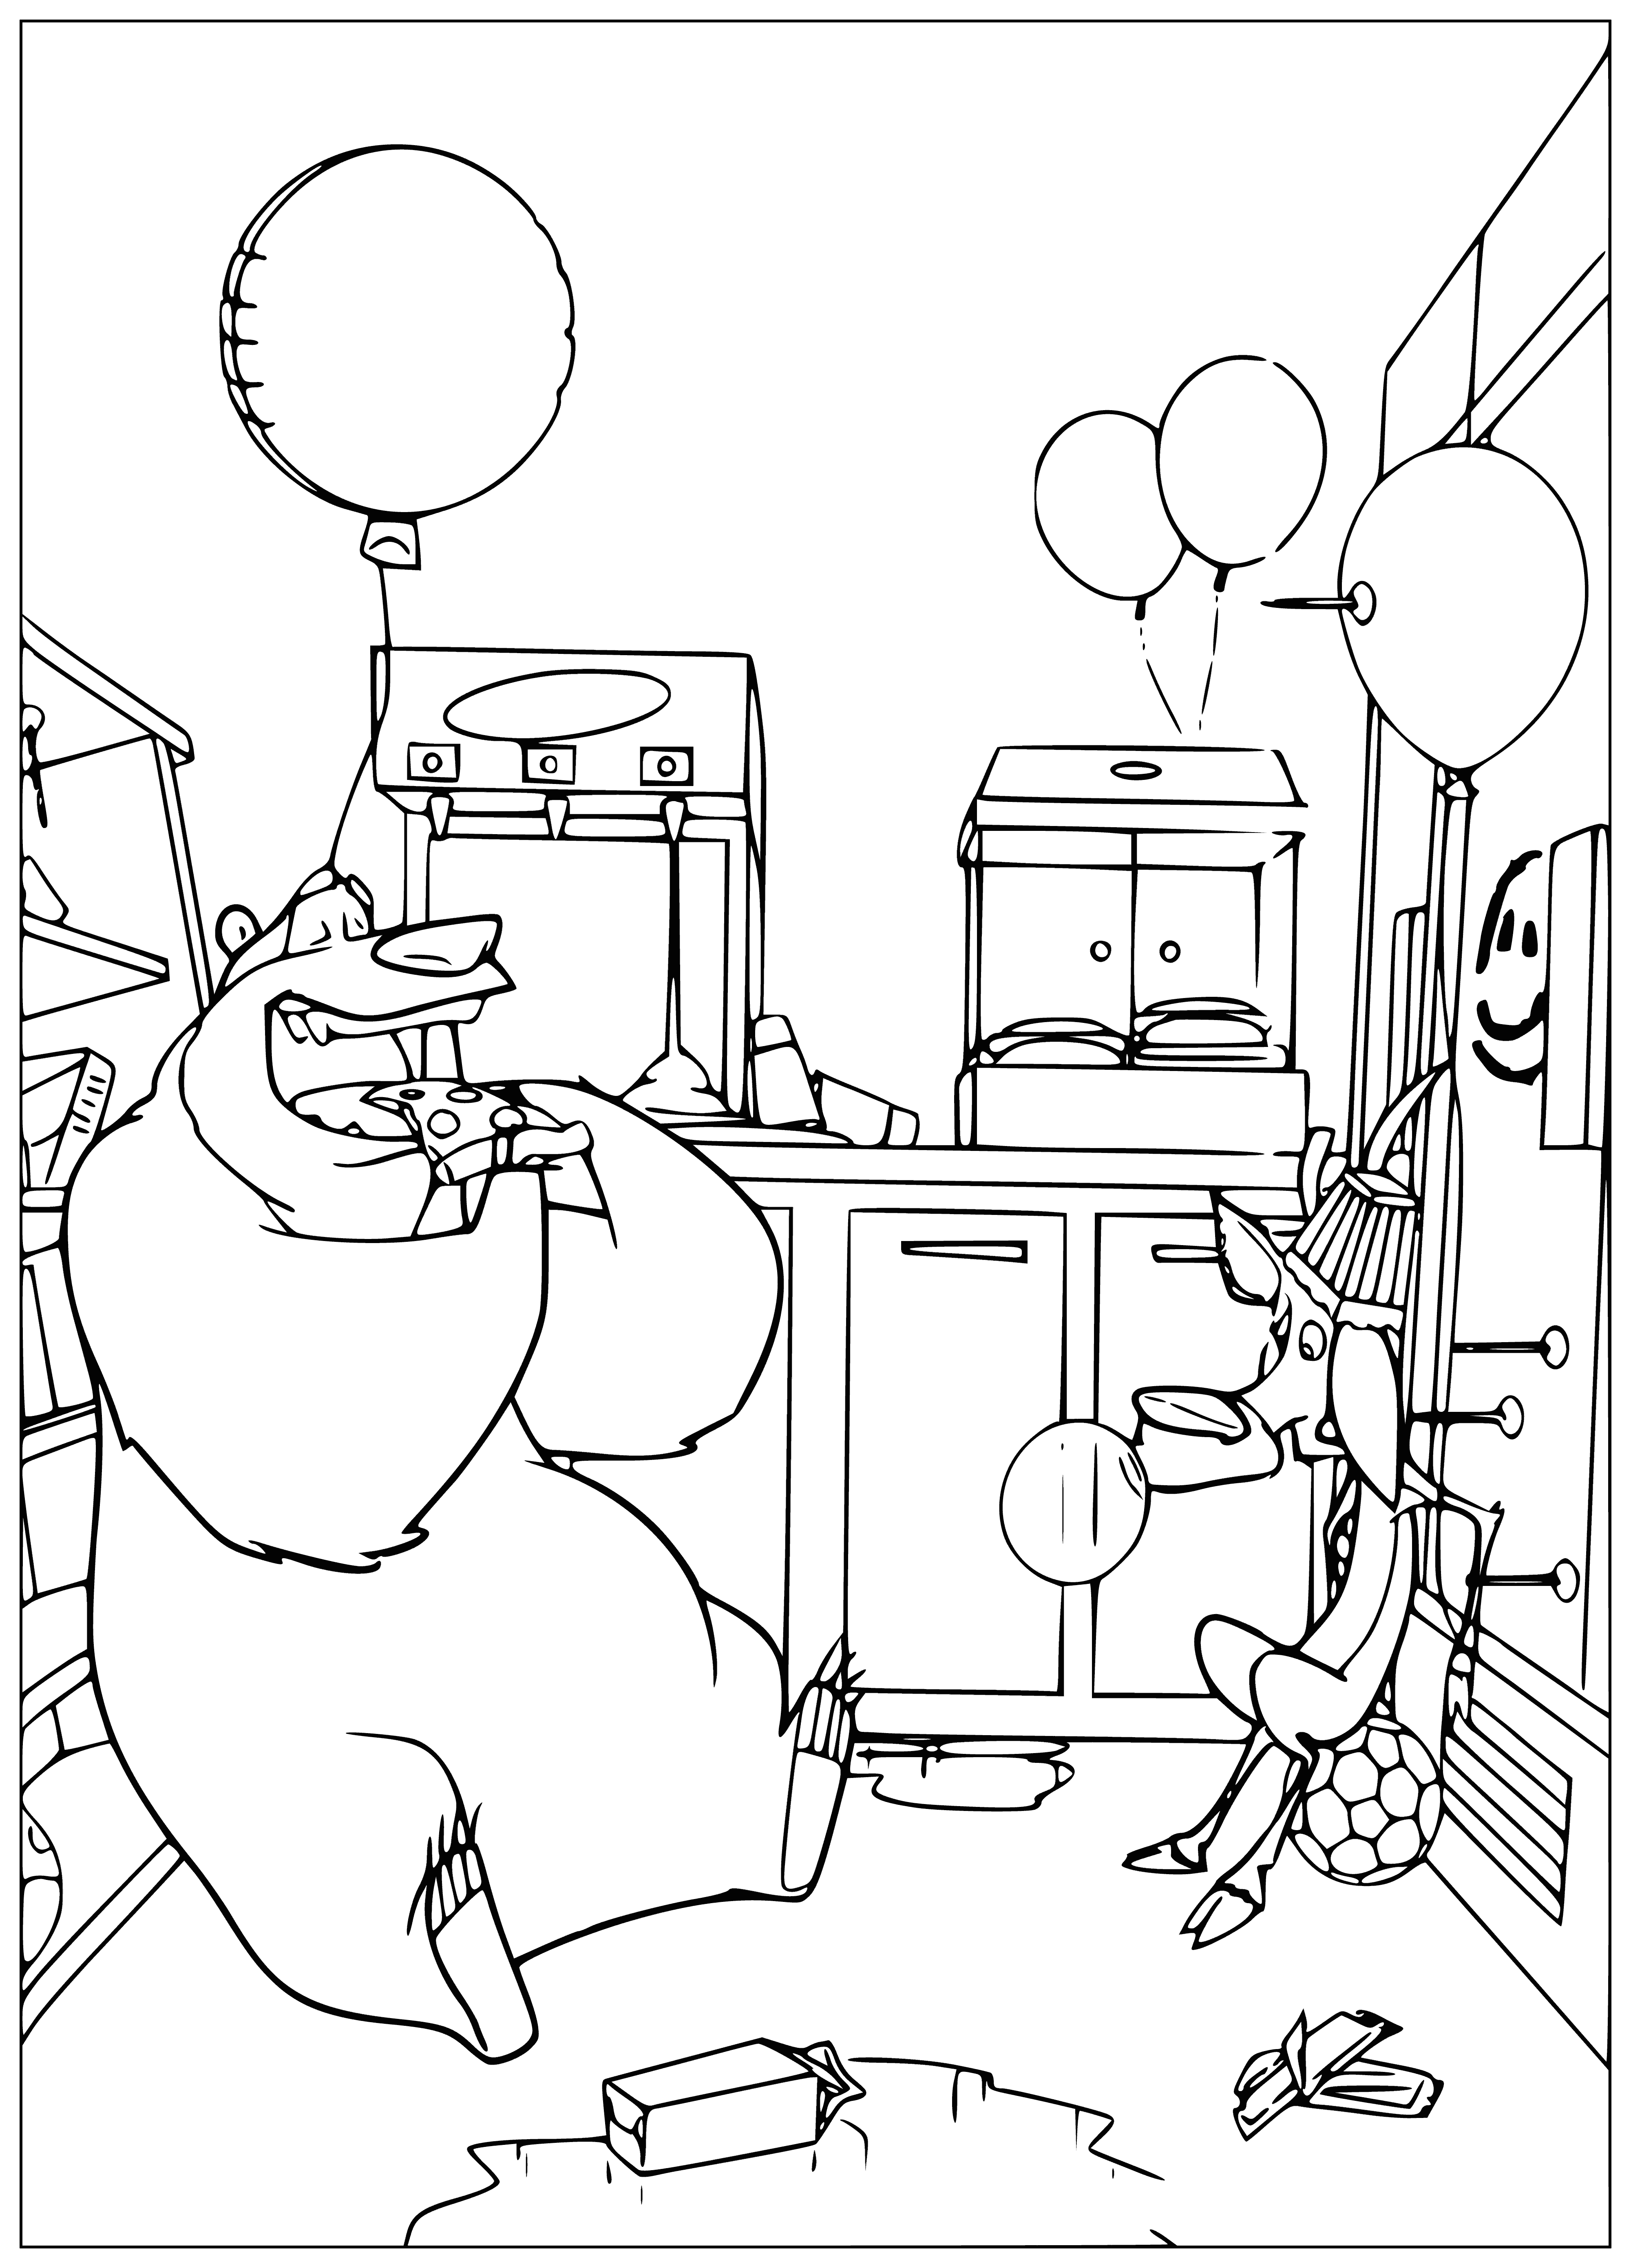 Feast of the stomach coloring page